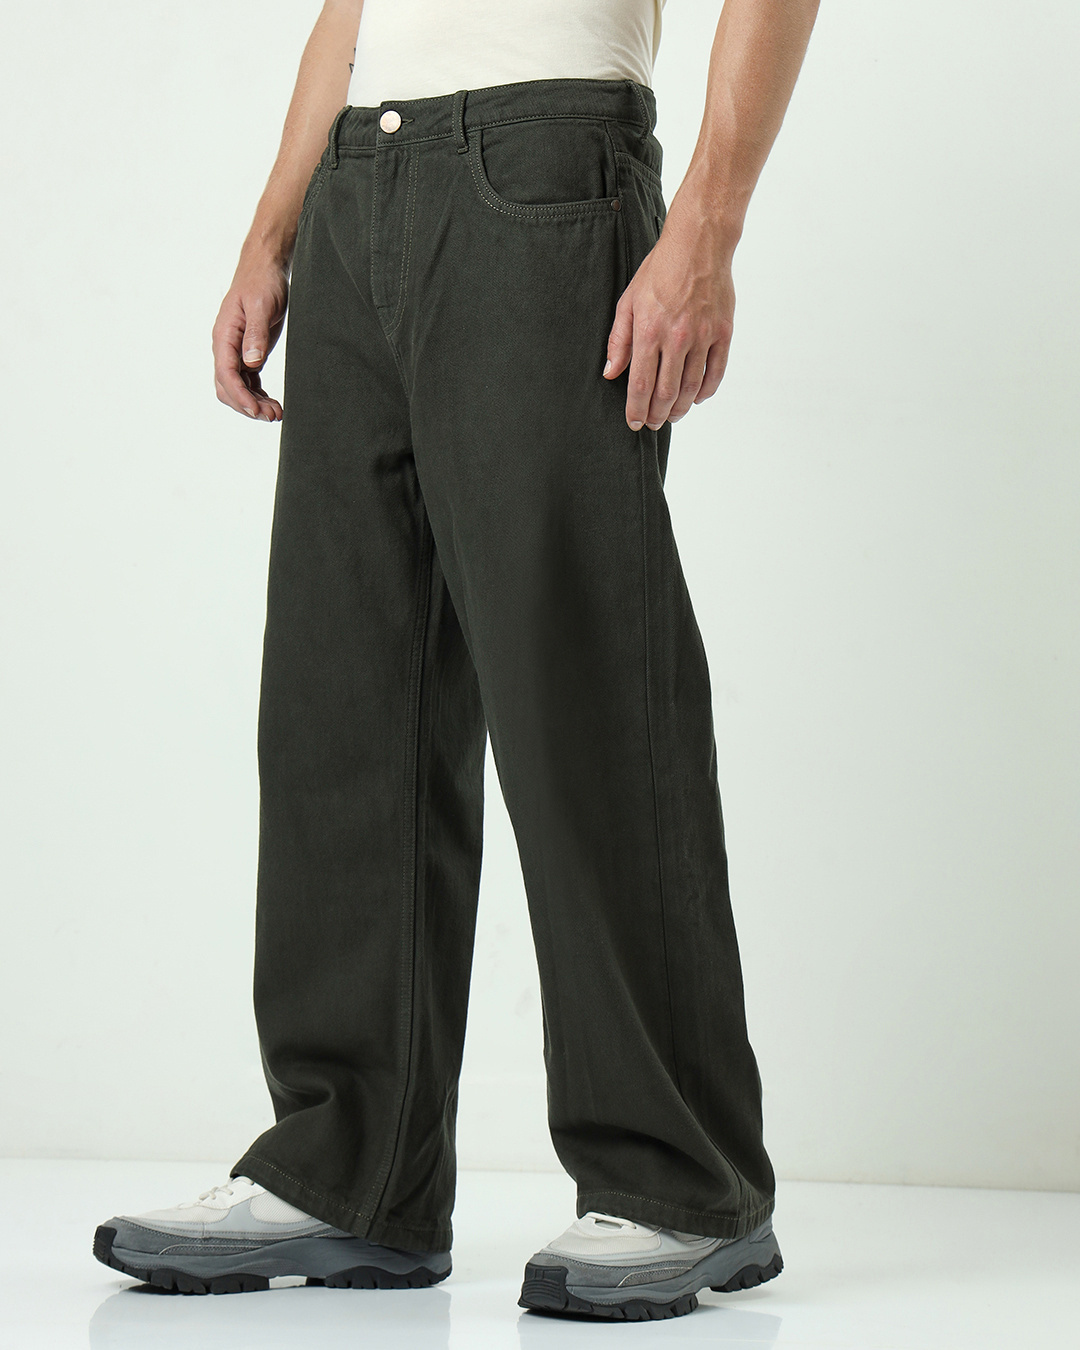 Buy Men's Olive Baggy Straight Fit Jeans Online at Bewakoof